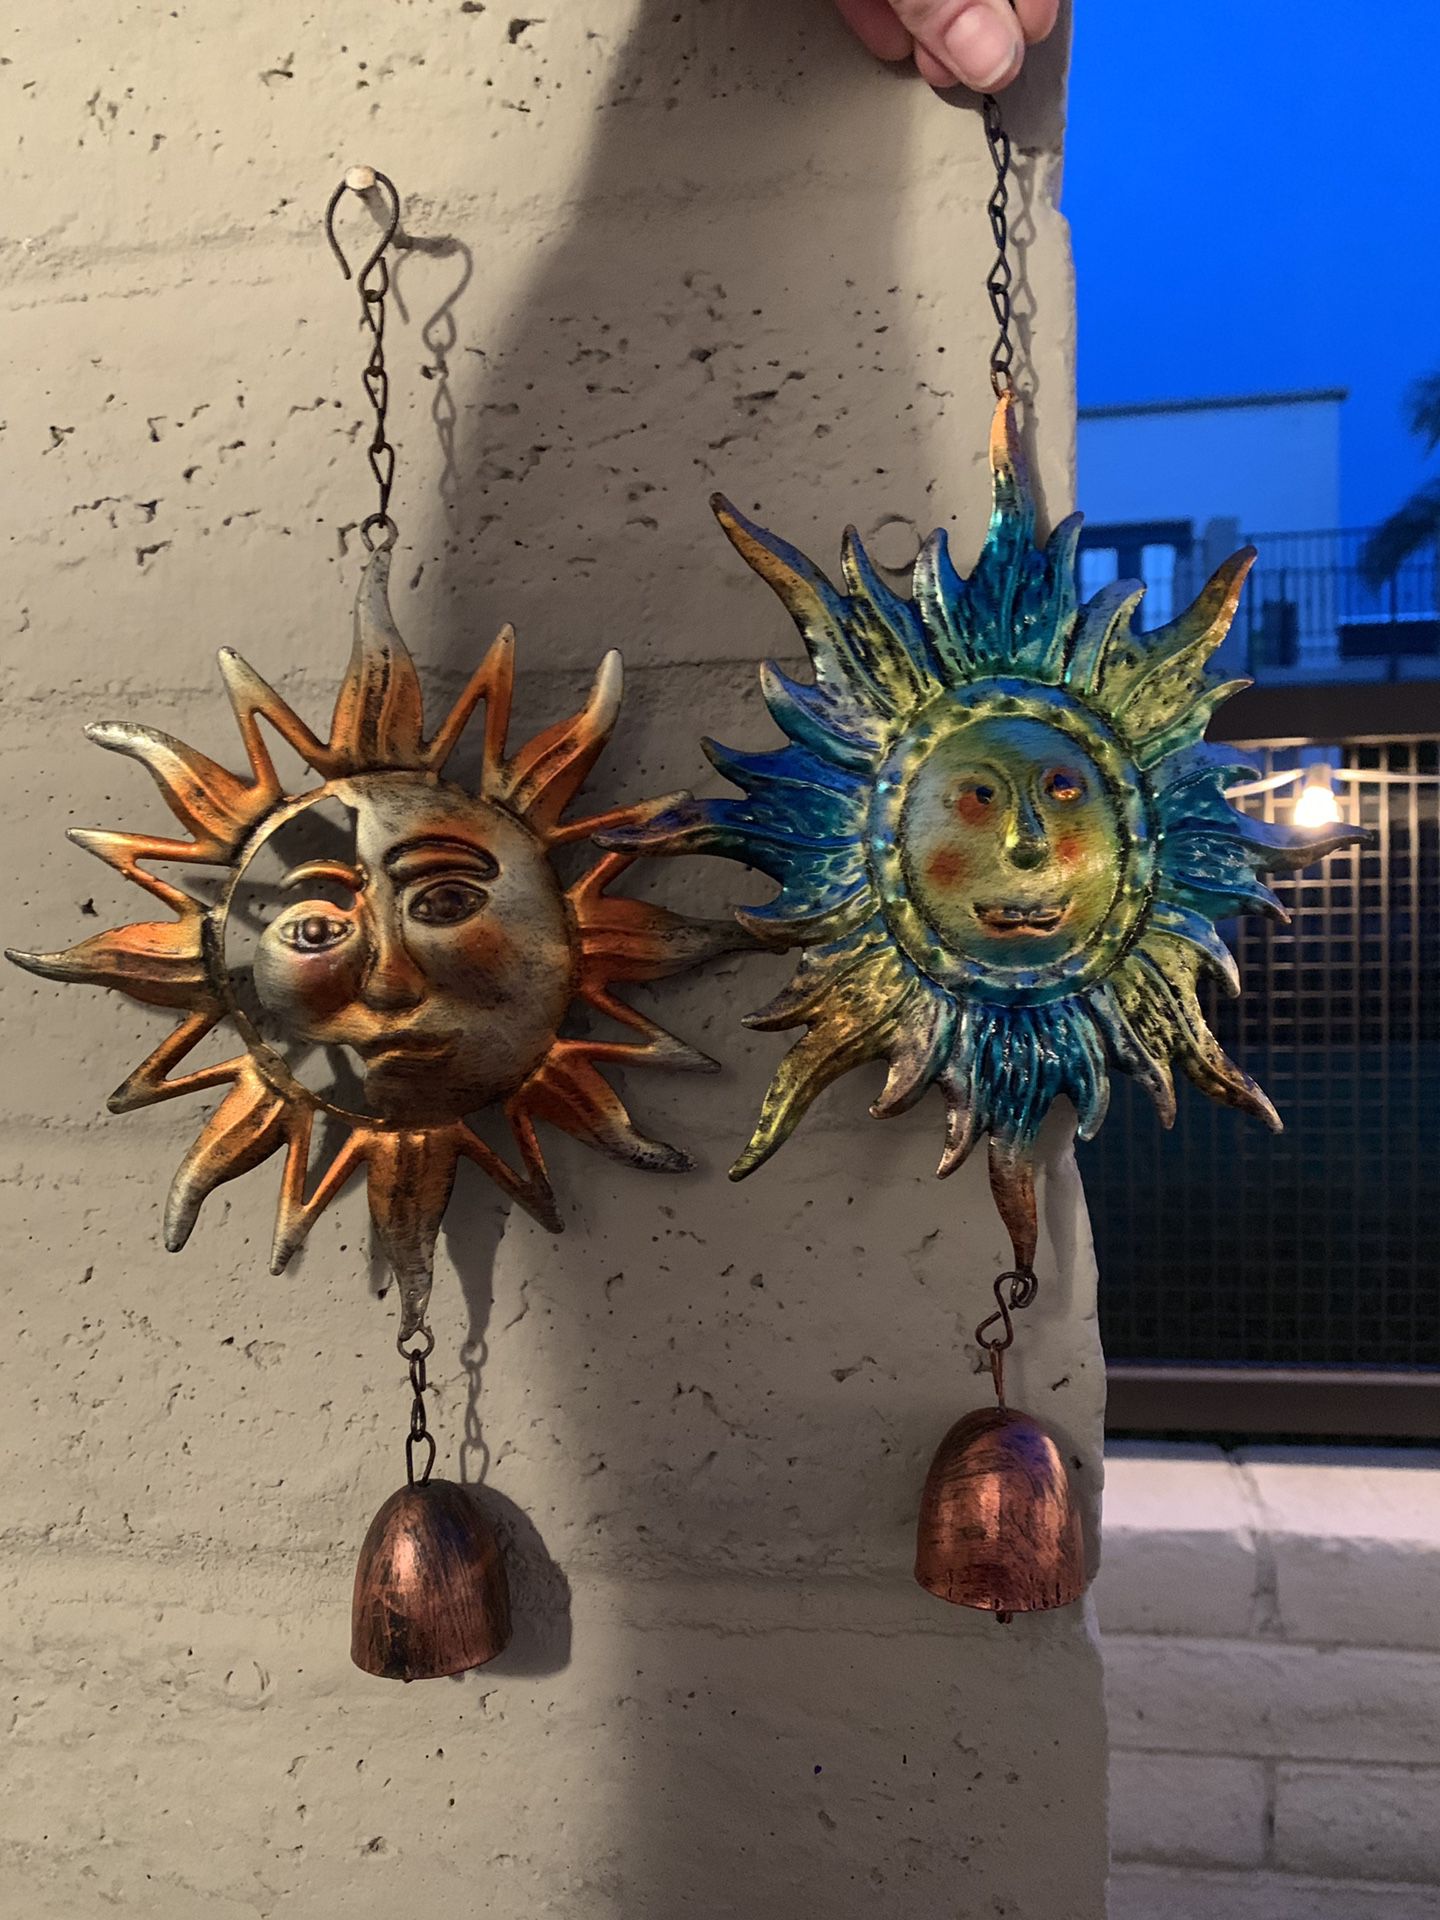 2 for $5 sun metal wind chimes